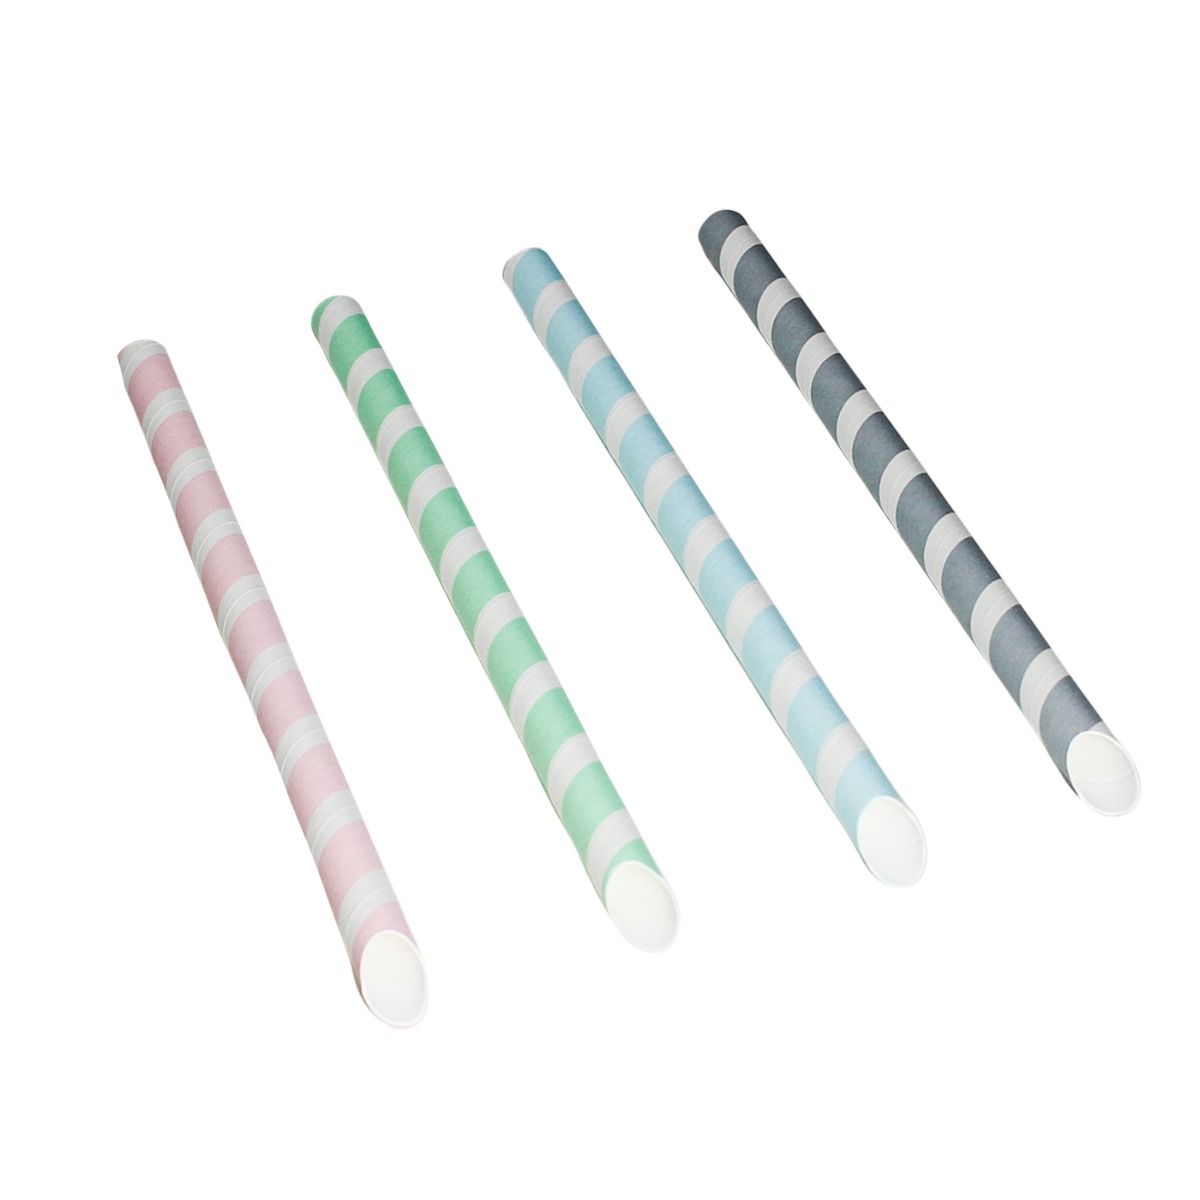 80 x Bio-degradable Party Drinking Straw 23cm White Compostable Plastic Straw